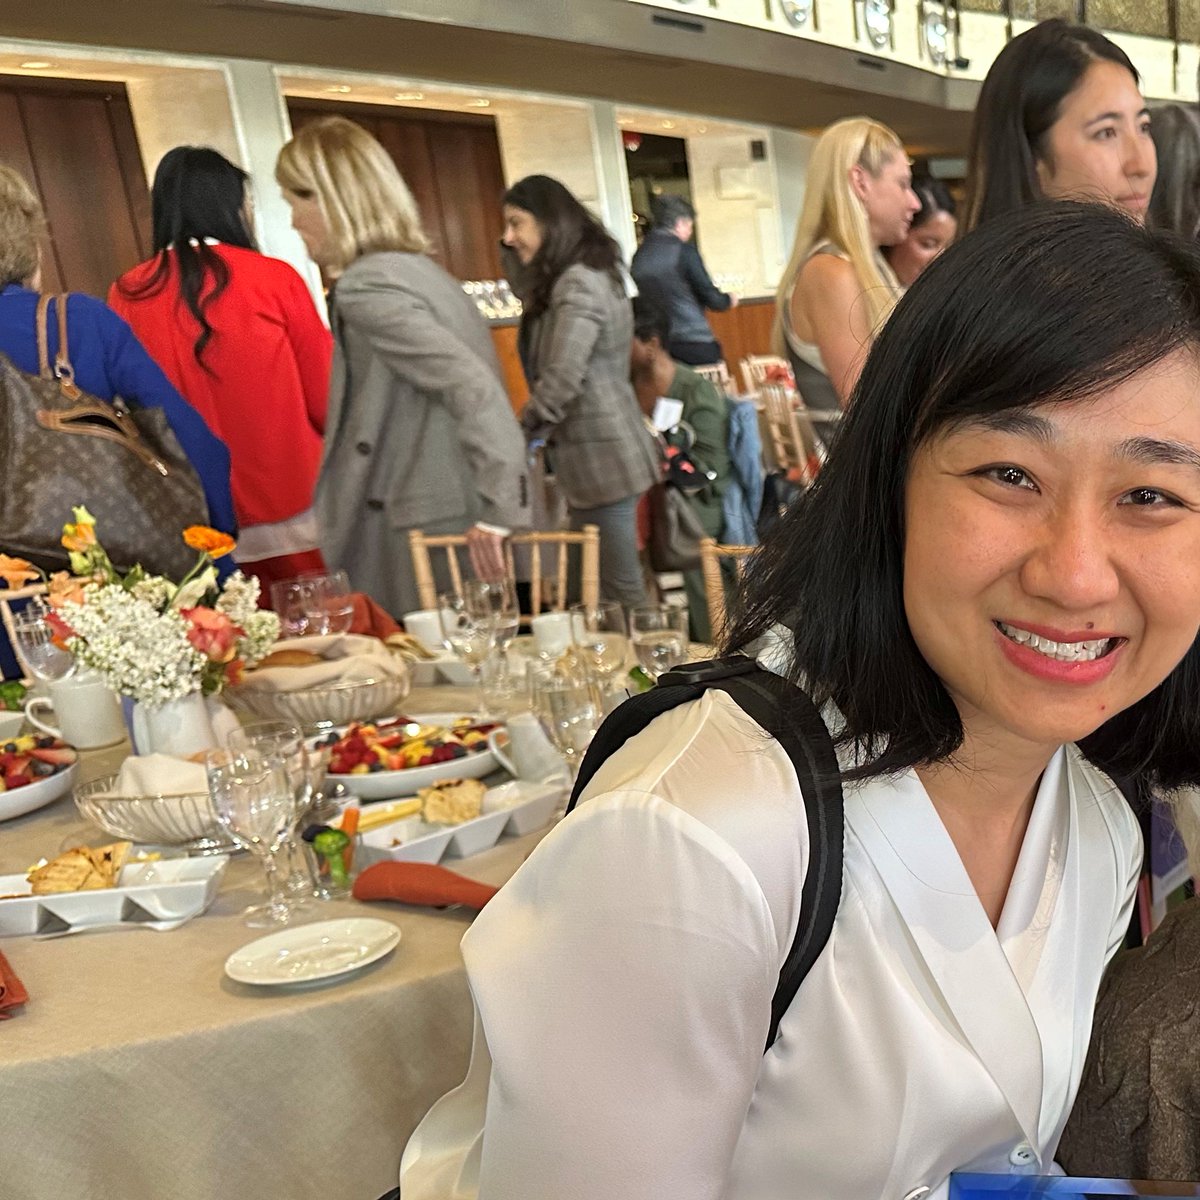 Congrats to @jiahweing on receiving the 'Barbara Hrbek Zucker Emerging Science Award' for 'Telehealth to Improve Post-#AKI care and reduce rehospitalizations' This award is supported by Advancing Women in Science in Medicine at Feinstein Institute of Medical Research @ZuckerSoM